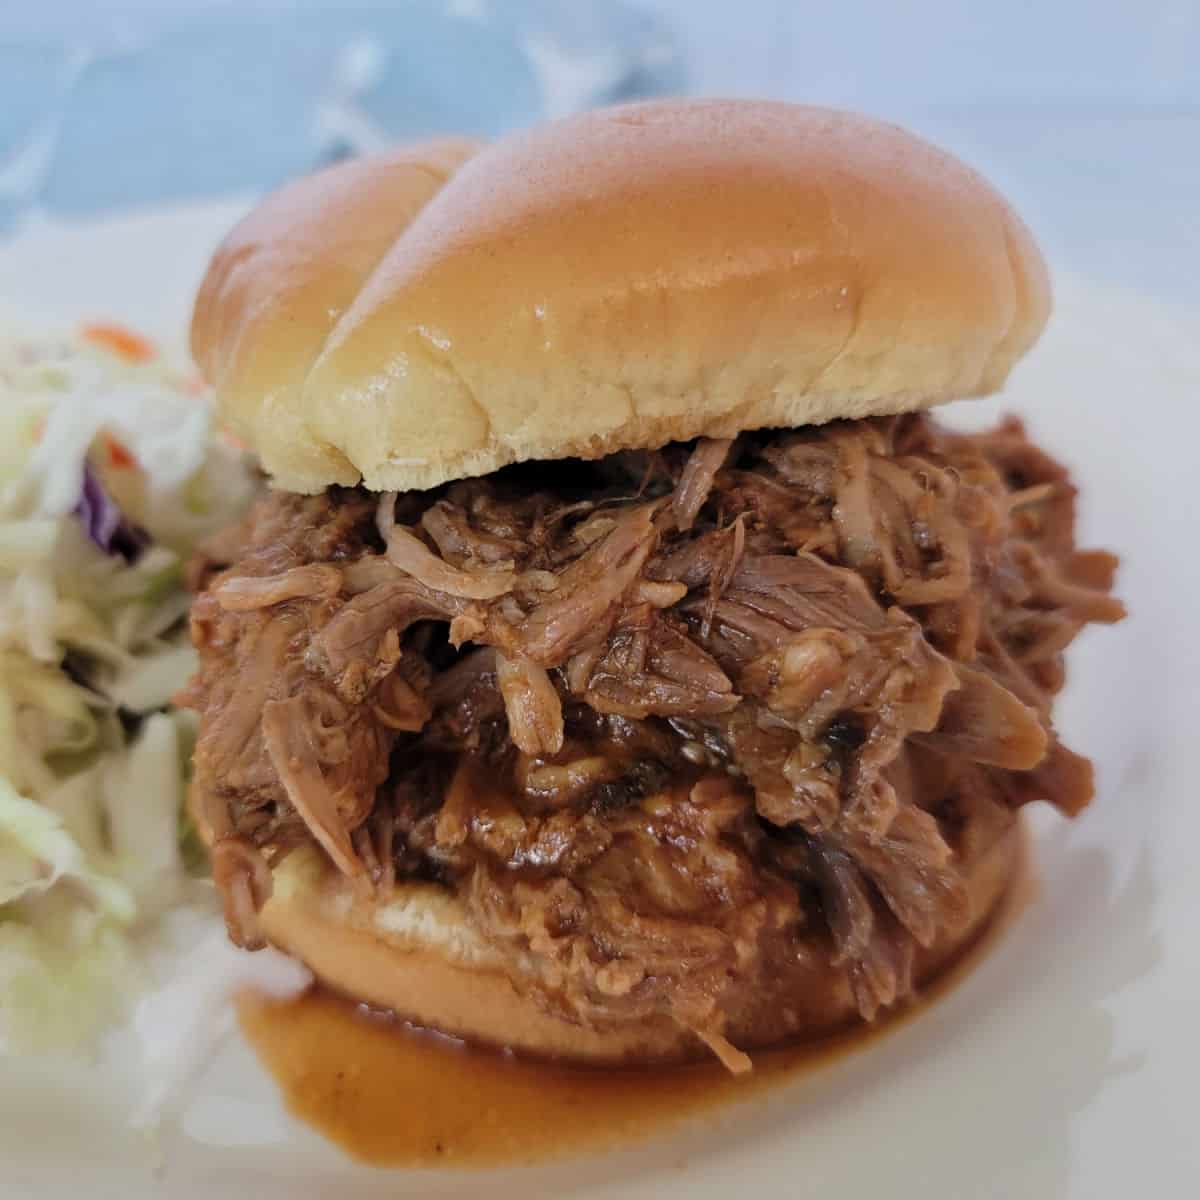 Dr Pepper Pulled pork piled on a sandwich bun next to coleslaw